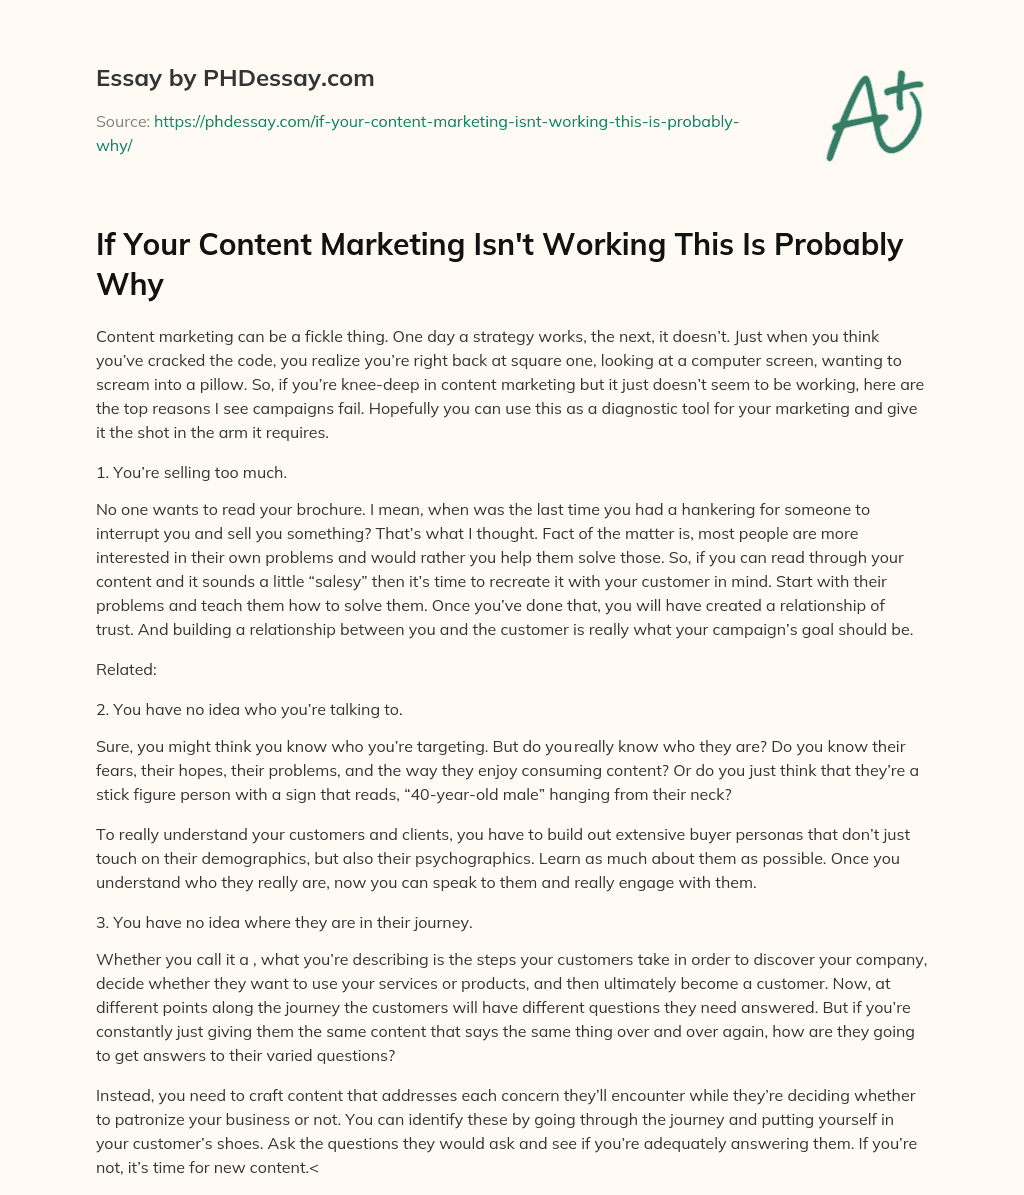 If Your Content Marketing Isn’t Working This Is Probably Why essay